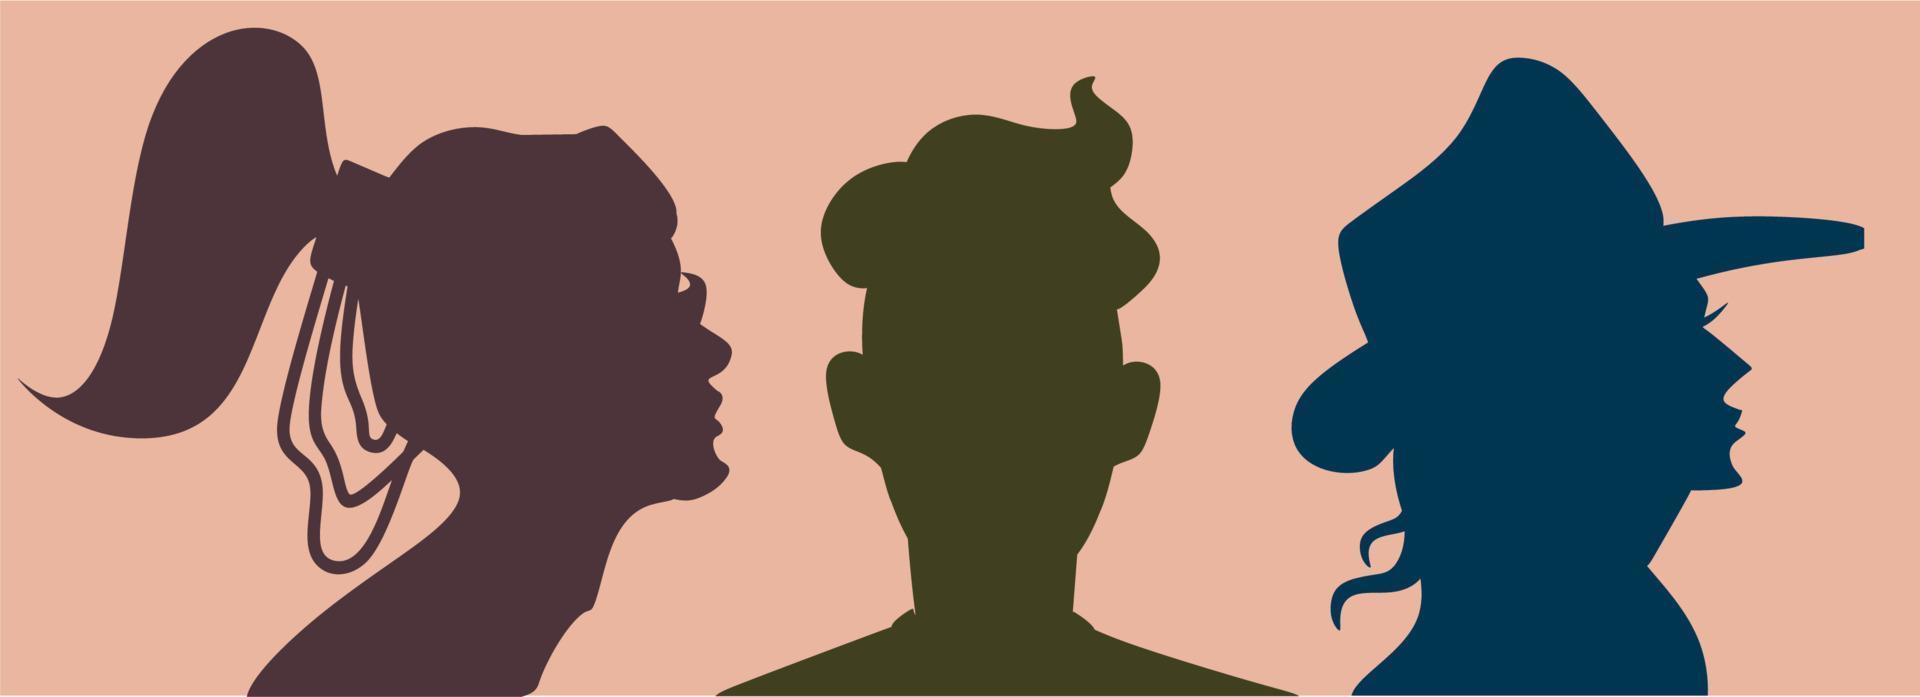 Three human silhouettes in pastel colors. Female and male profiles in blue, purple and khaki colors. The background is a peach rectangle. vector